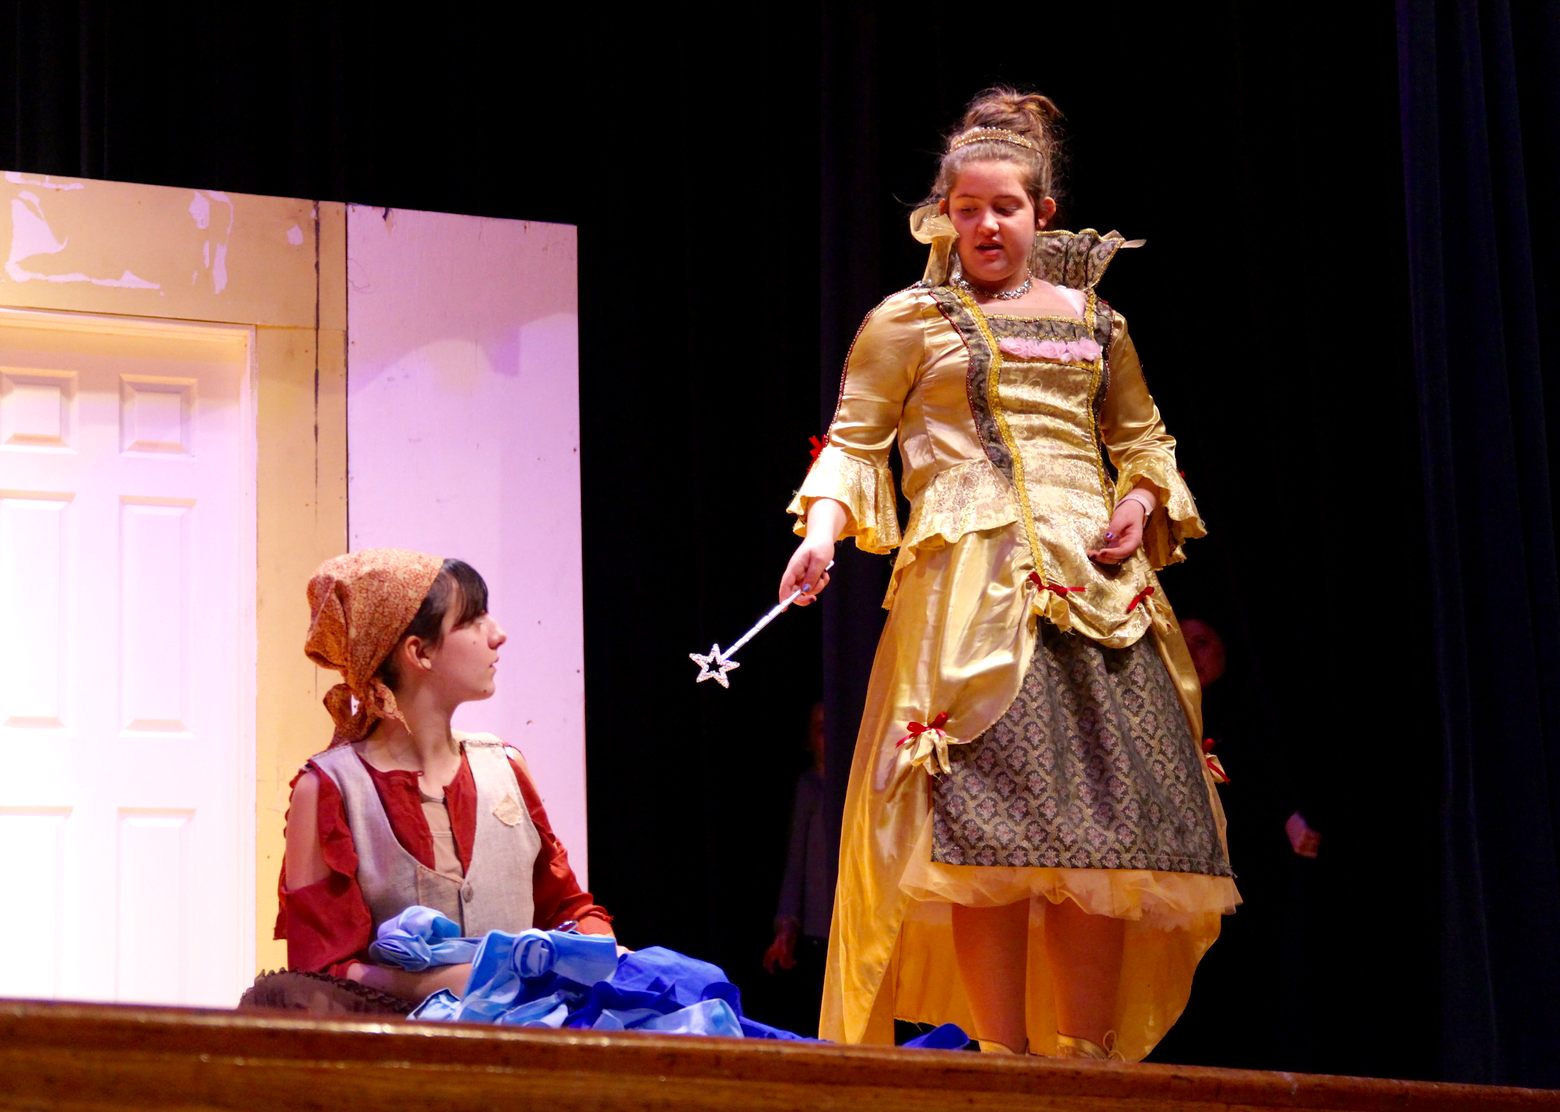 Alexandra Lawler rehearses her role as Marie the fairy godmother at dress rehearsal for Eastern Middle School's performance of Cinderella. Jan 6, 2018 Photo: Leslie Yager